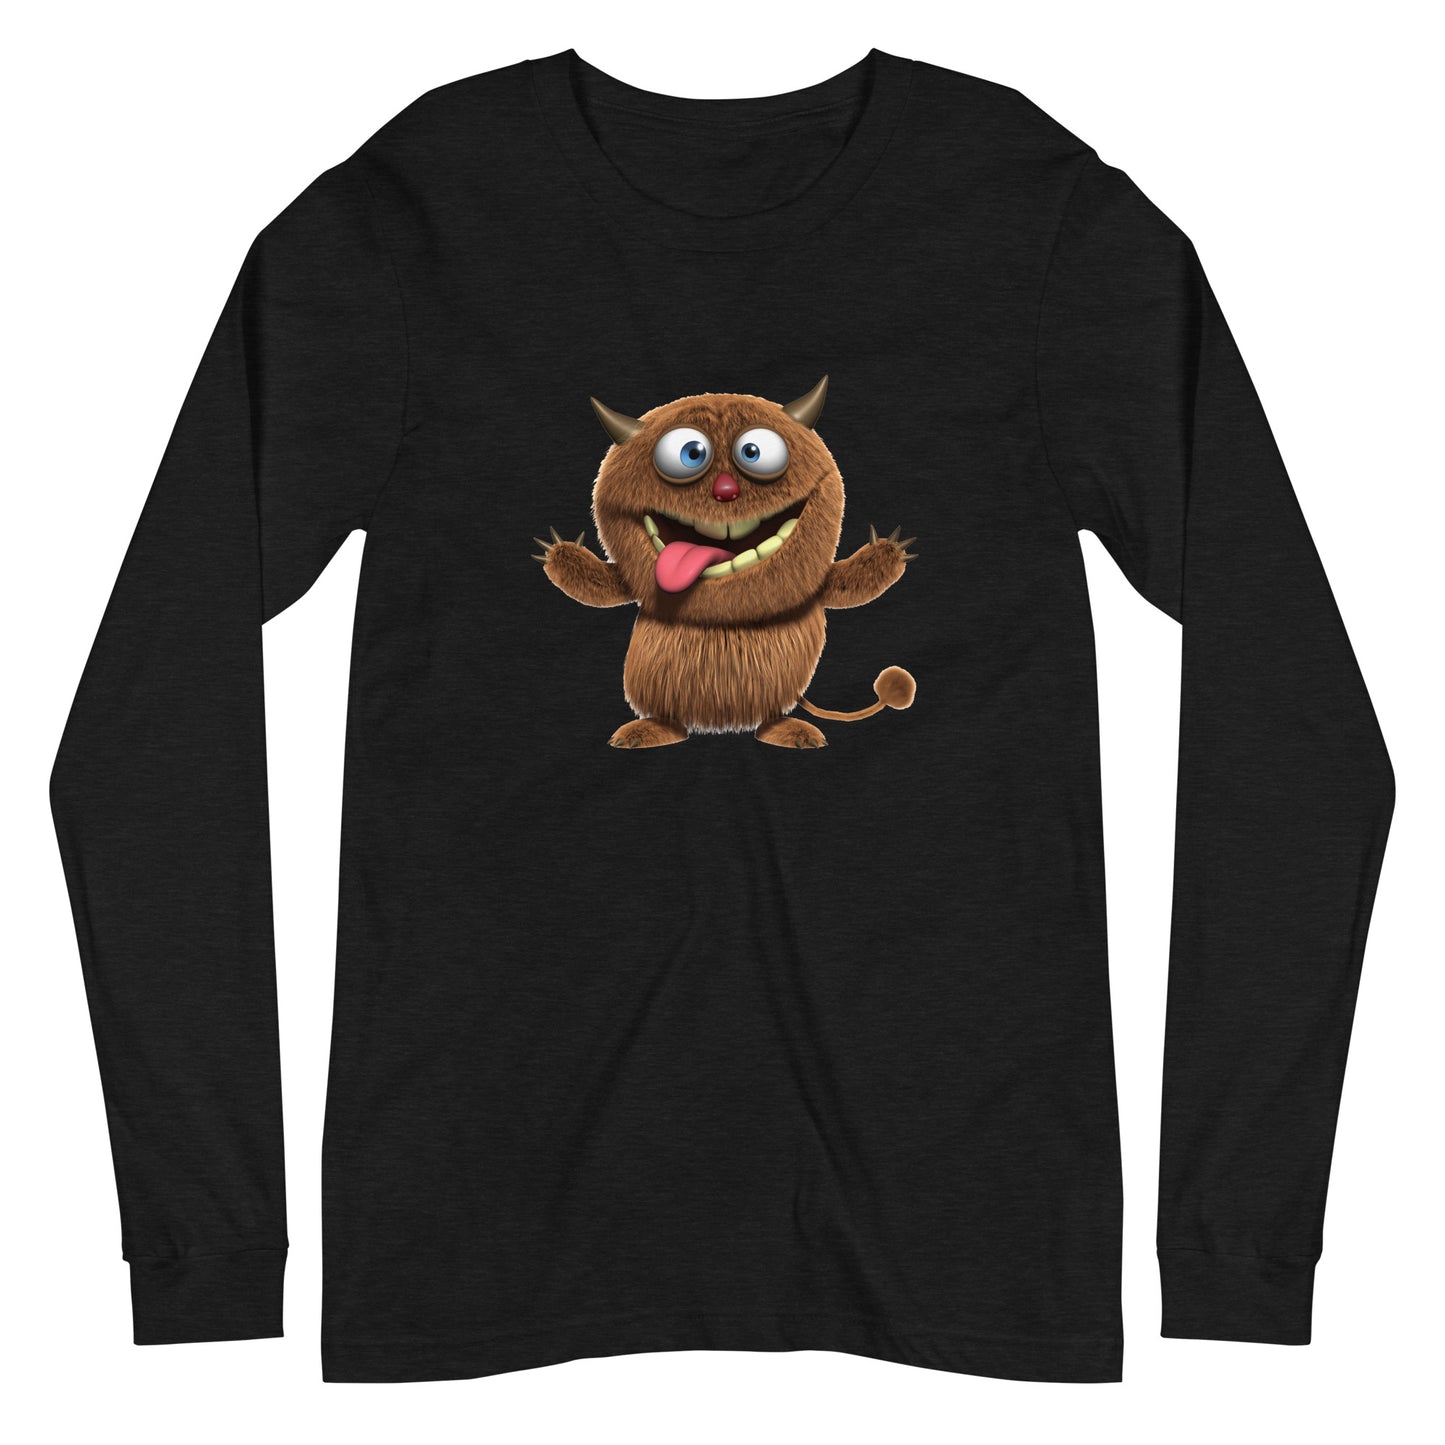 Super Silly & Soft THUMPER L/S Tee - Pulphouse Fiction Magazine Unisex Long Sleeve Tee